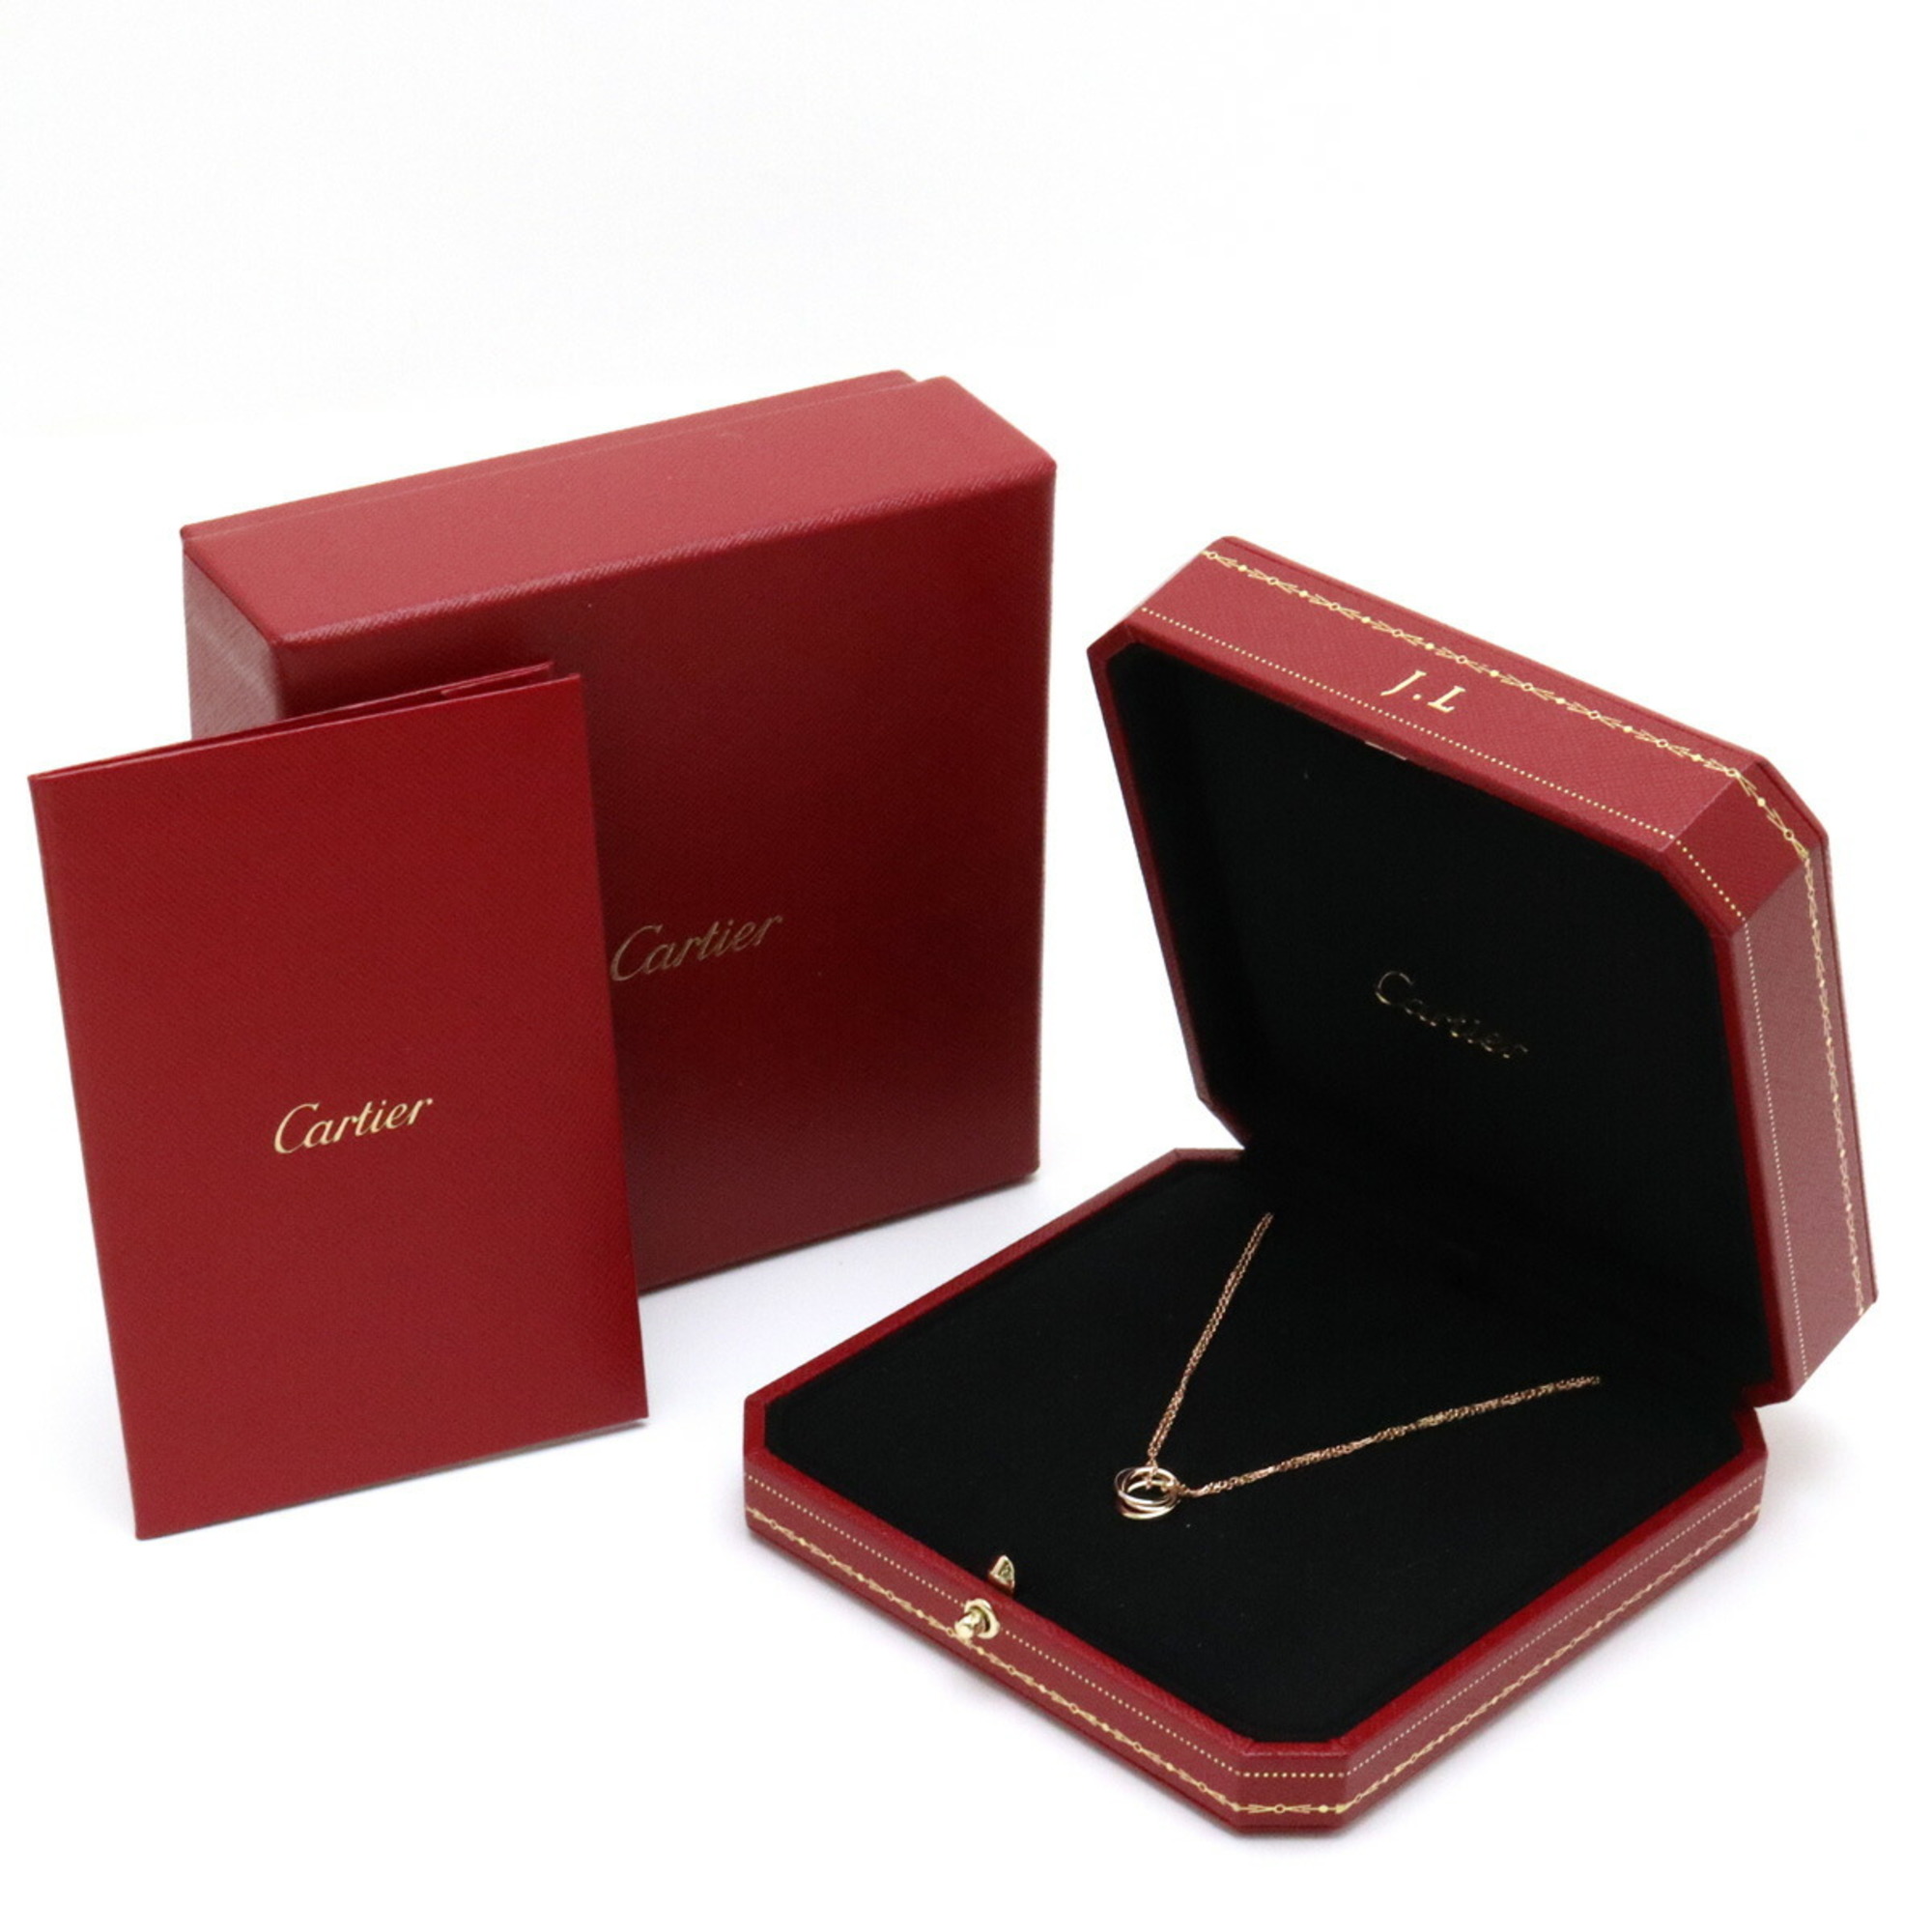 Finished Cartier Trinity Necklace Pendant Double Chain 3 Colors Gold K18YG WG PG Yellow White Pink B7218200